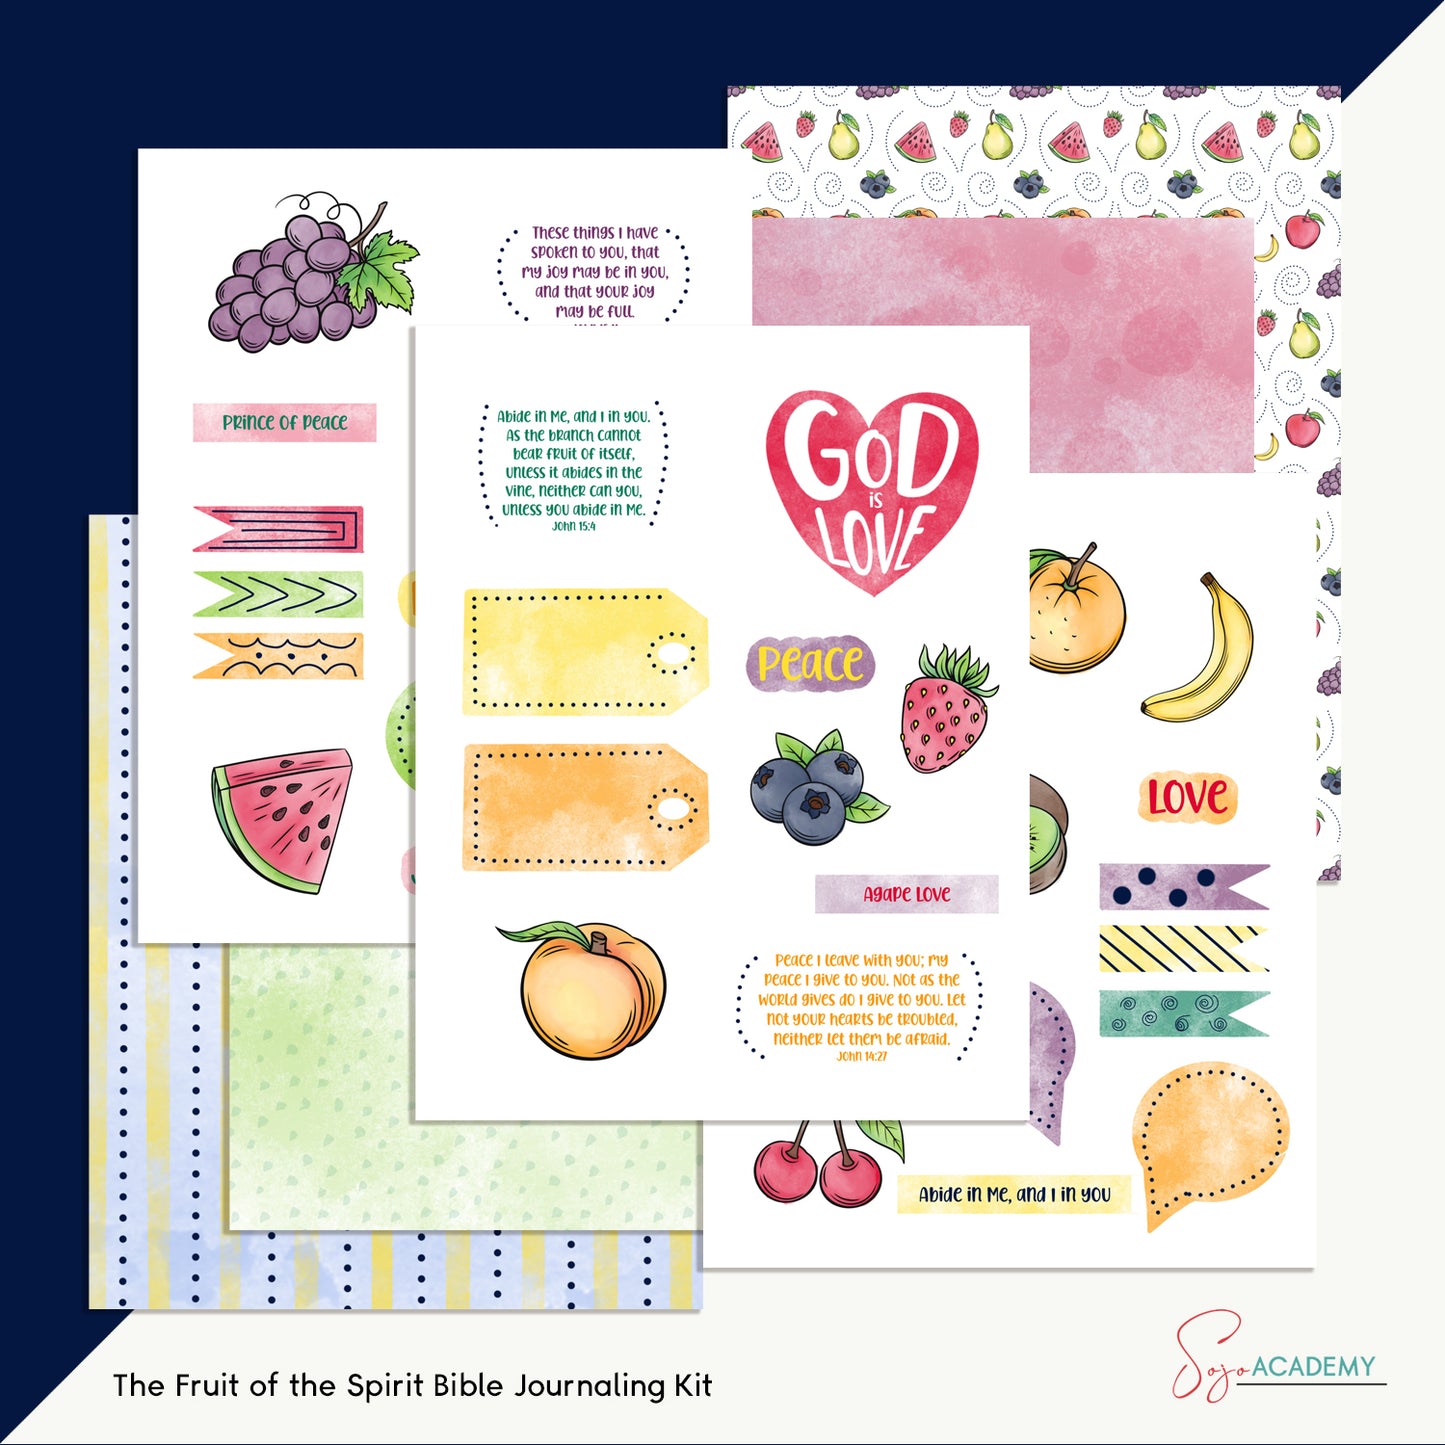 The Fruit of the Spirit: Abide in Christ and Bear Much Fruit (Part 1) Bible Journaling Kit